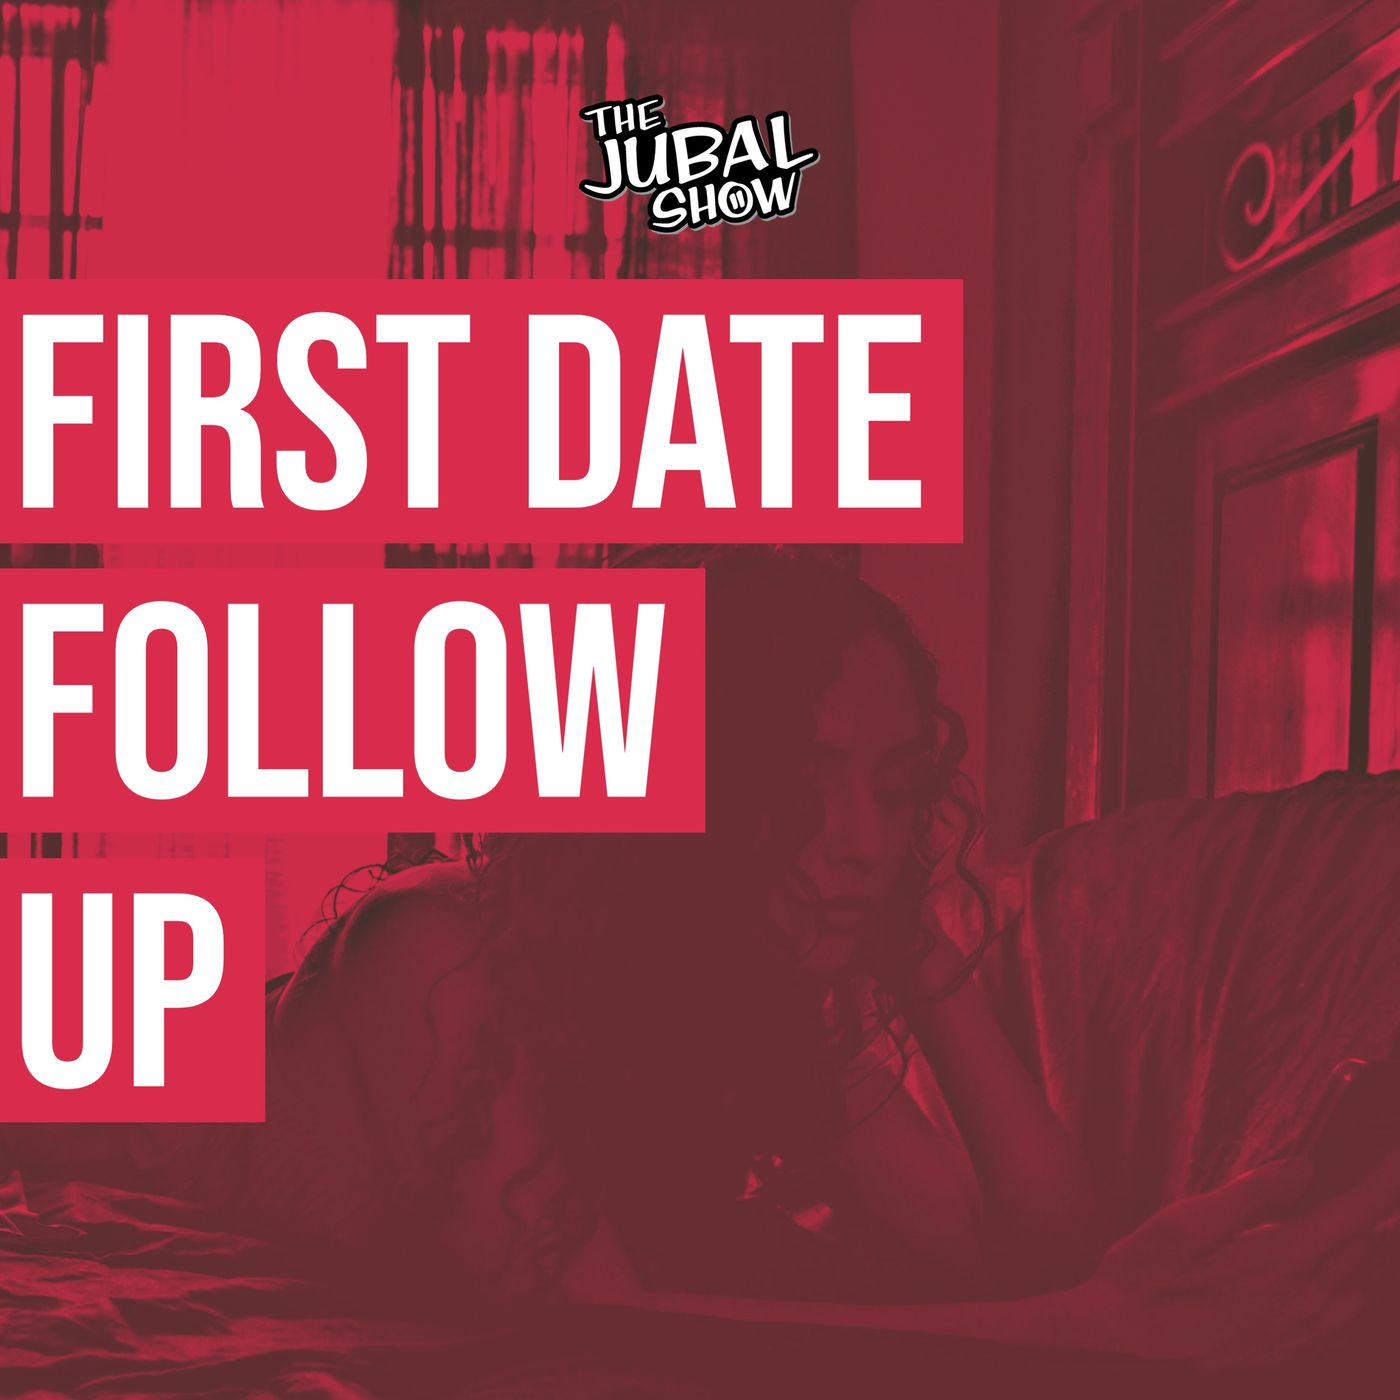 This First Date Follow Up is a little softer than all the others!